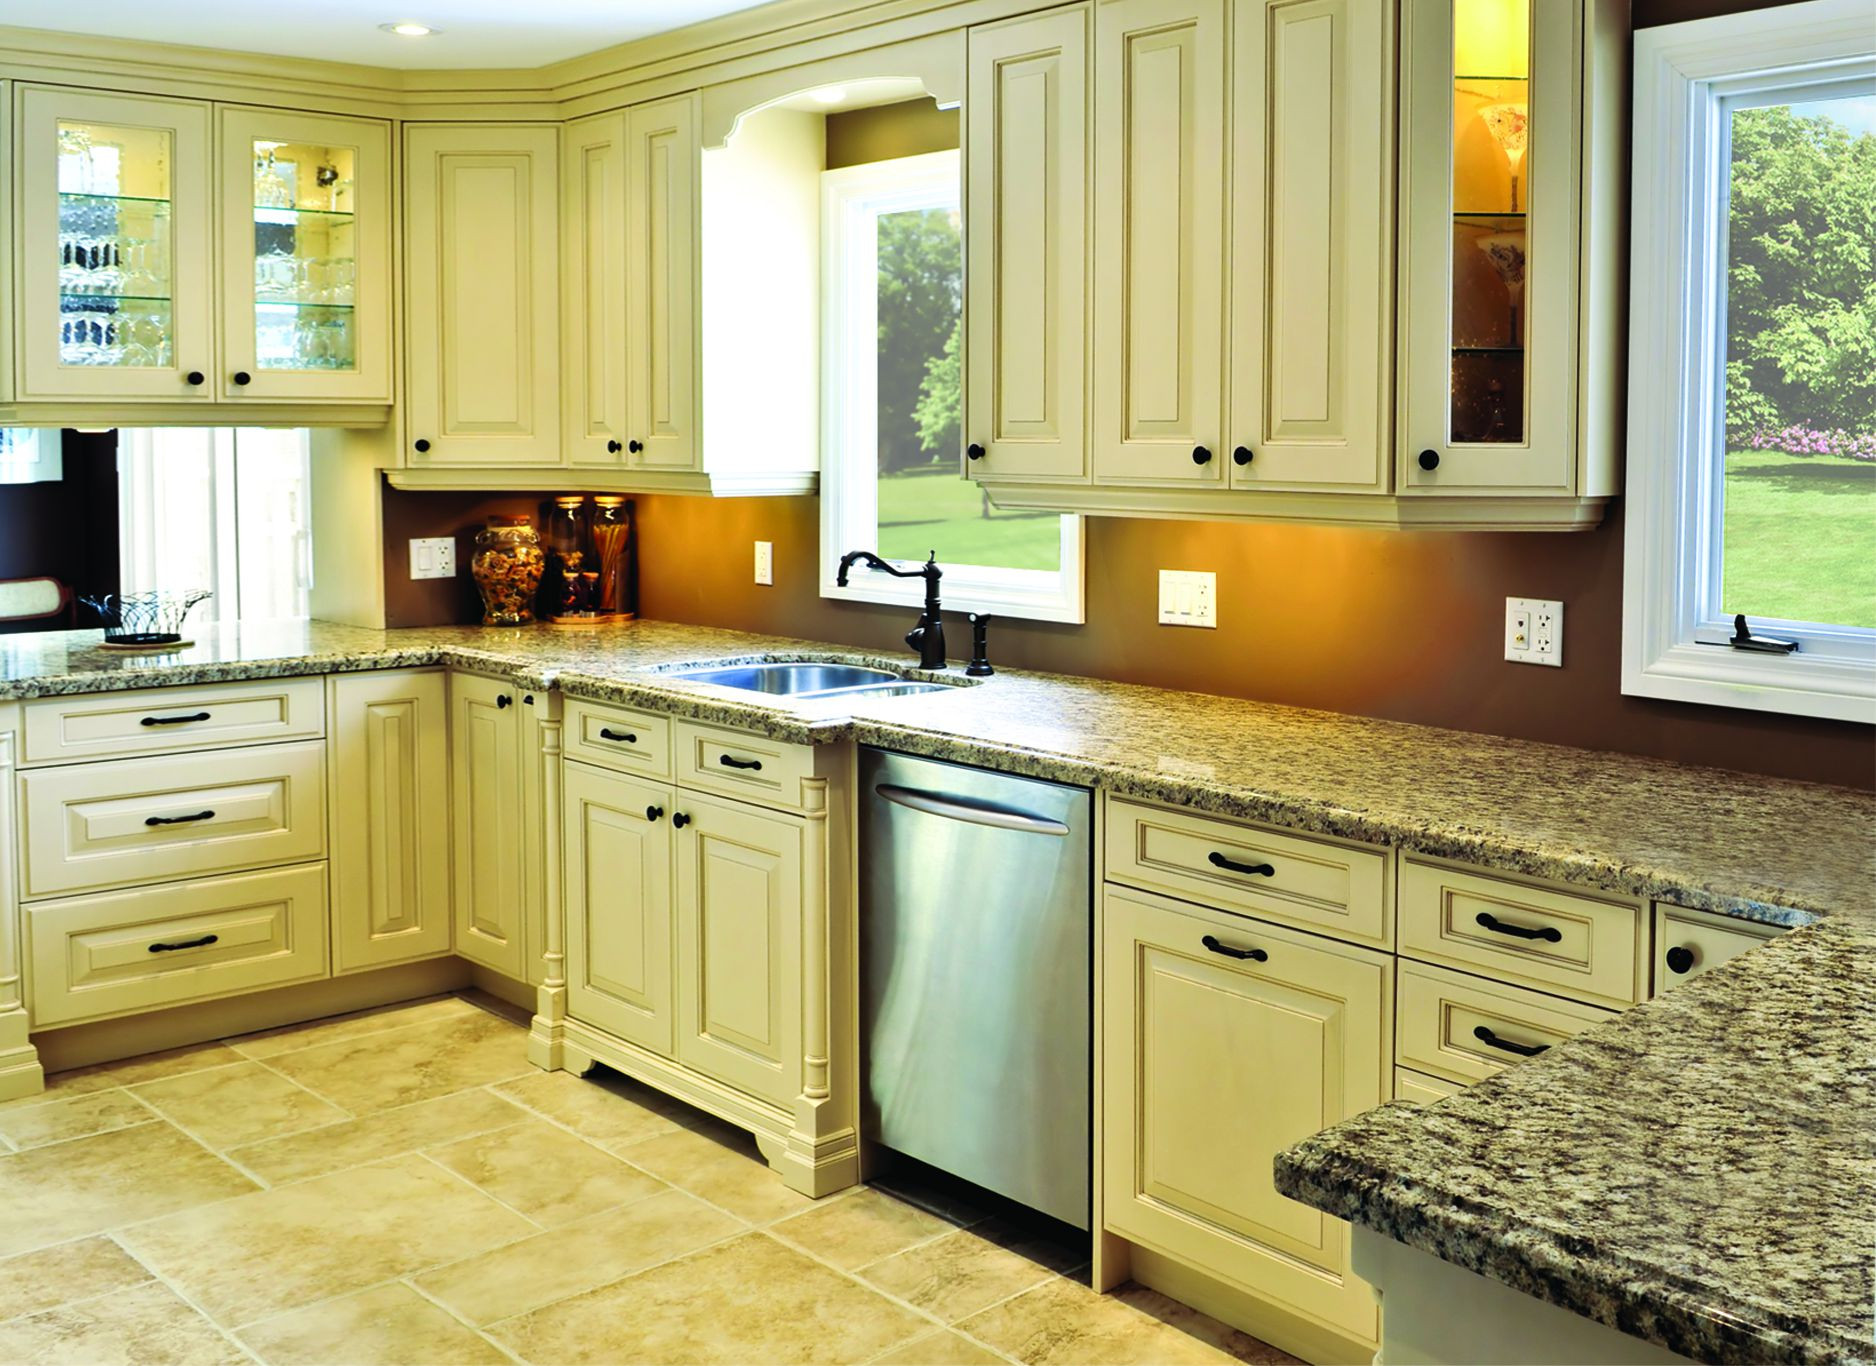 Kitchen Redesign Ideas
 Some Kitchen Remodeling Ideas To Increase The Value